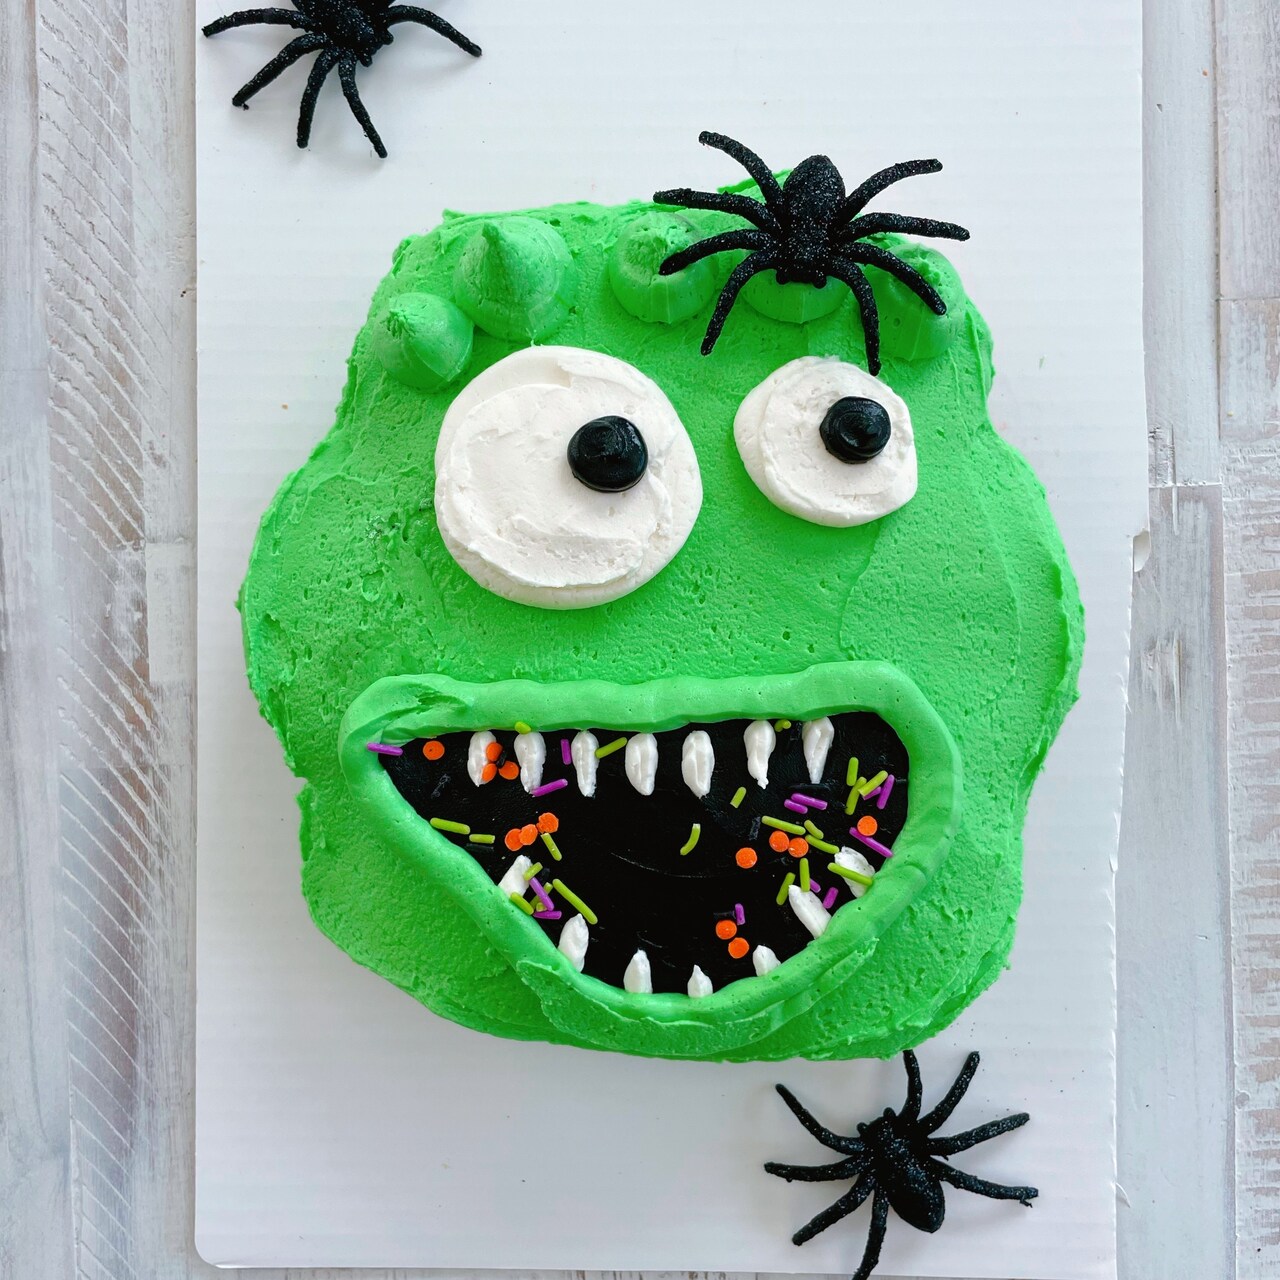 Pull-Apart Monster Cupcake Cake With Glow in the Dark Eyes